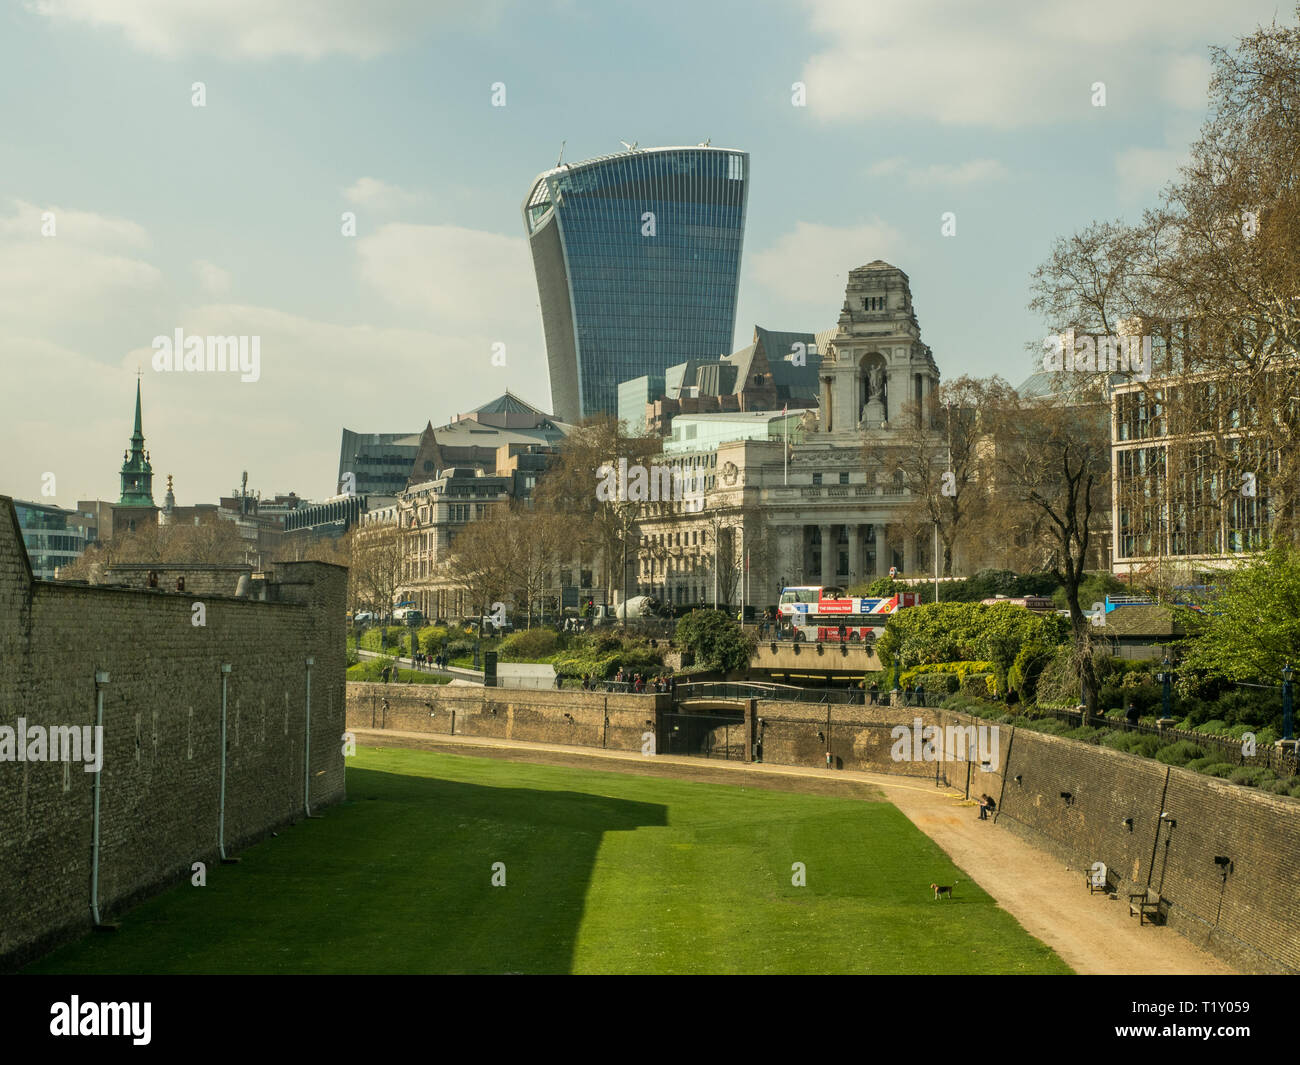 Grounds of the Tower of London with the 'Walkie Talkie' Skyscraper that houses the Sky Garden behind. London, England. Stock Photo